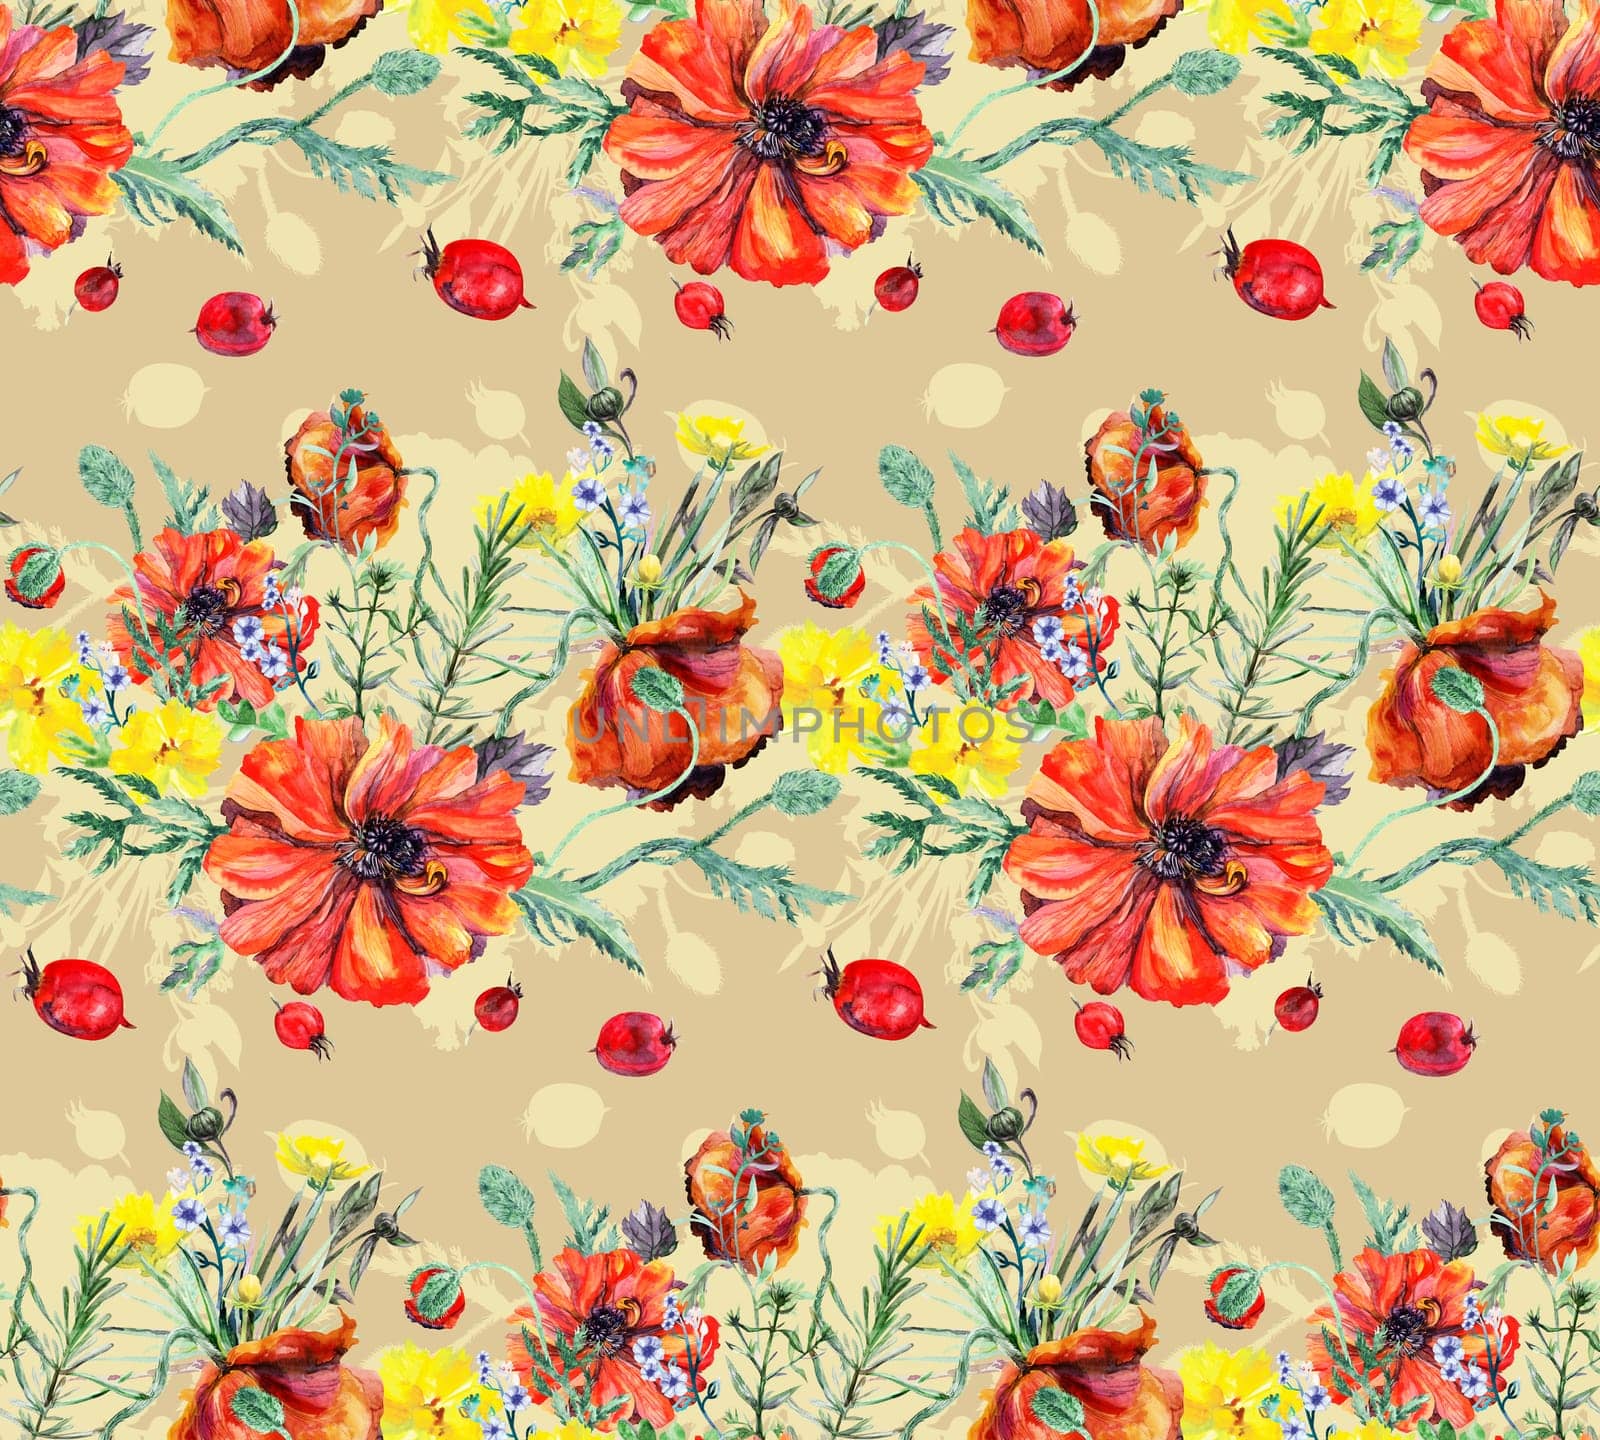 Seamless watercolor pattern with a bouquet of red poppies and field herbs on a beige background for summer textiles and surface design